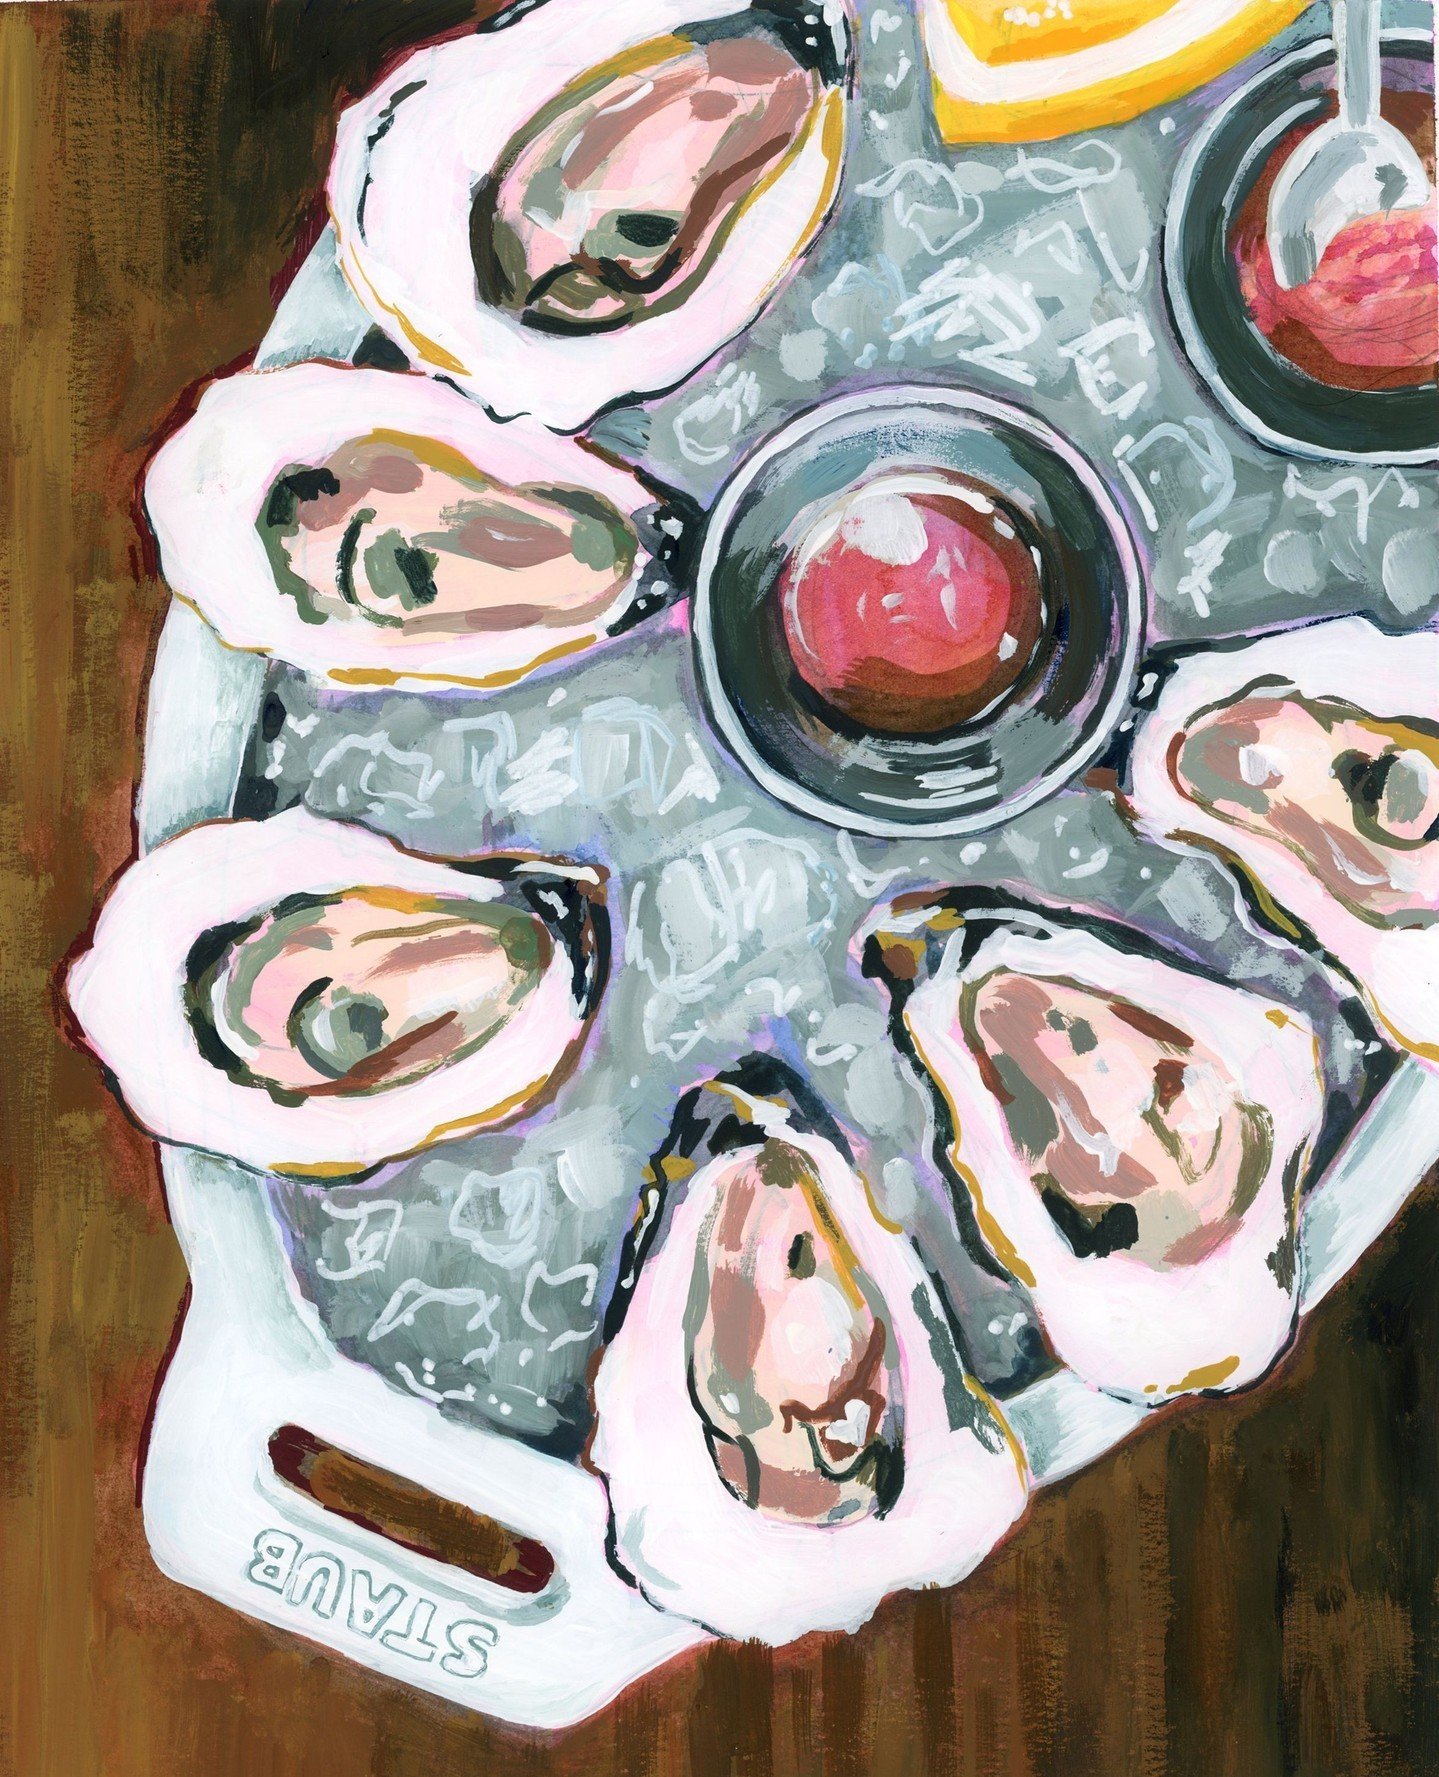 A favorite painting from last year. Nothing beats oysters on the half shell 🤗⁠
⁠
11 x 14 mixed media on paper⁠
🔴 *sold* through @artandlightgallery⁠
⁠
#operapink #watercolor #mixedmedia #workonpaper #foodillustration #foodpainting #farmersmarketpai